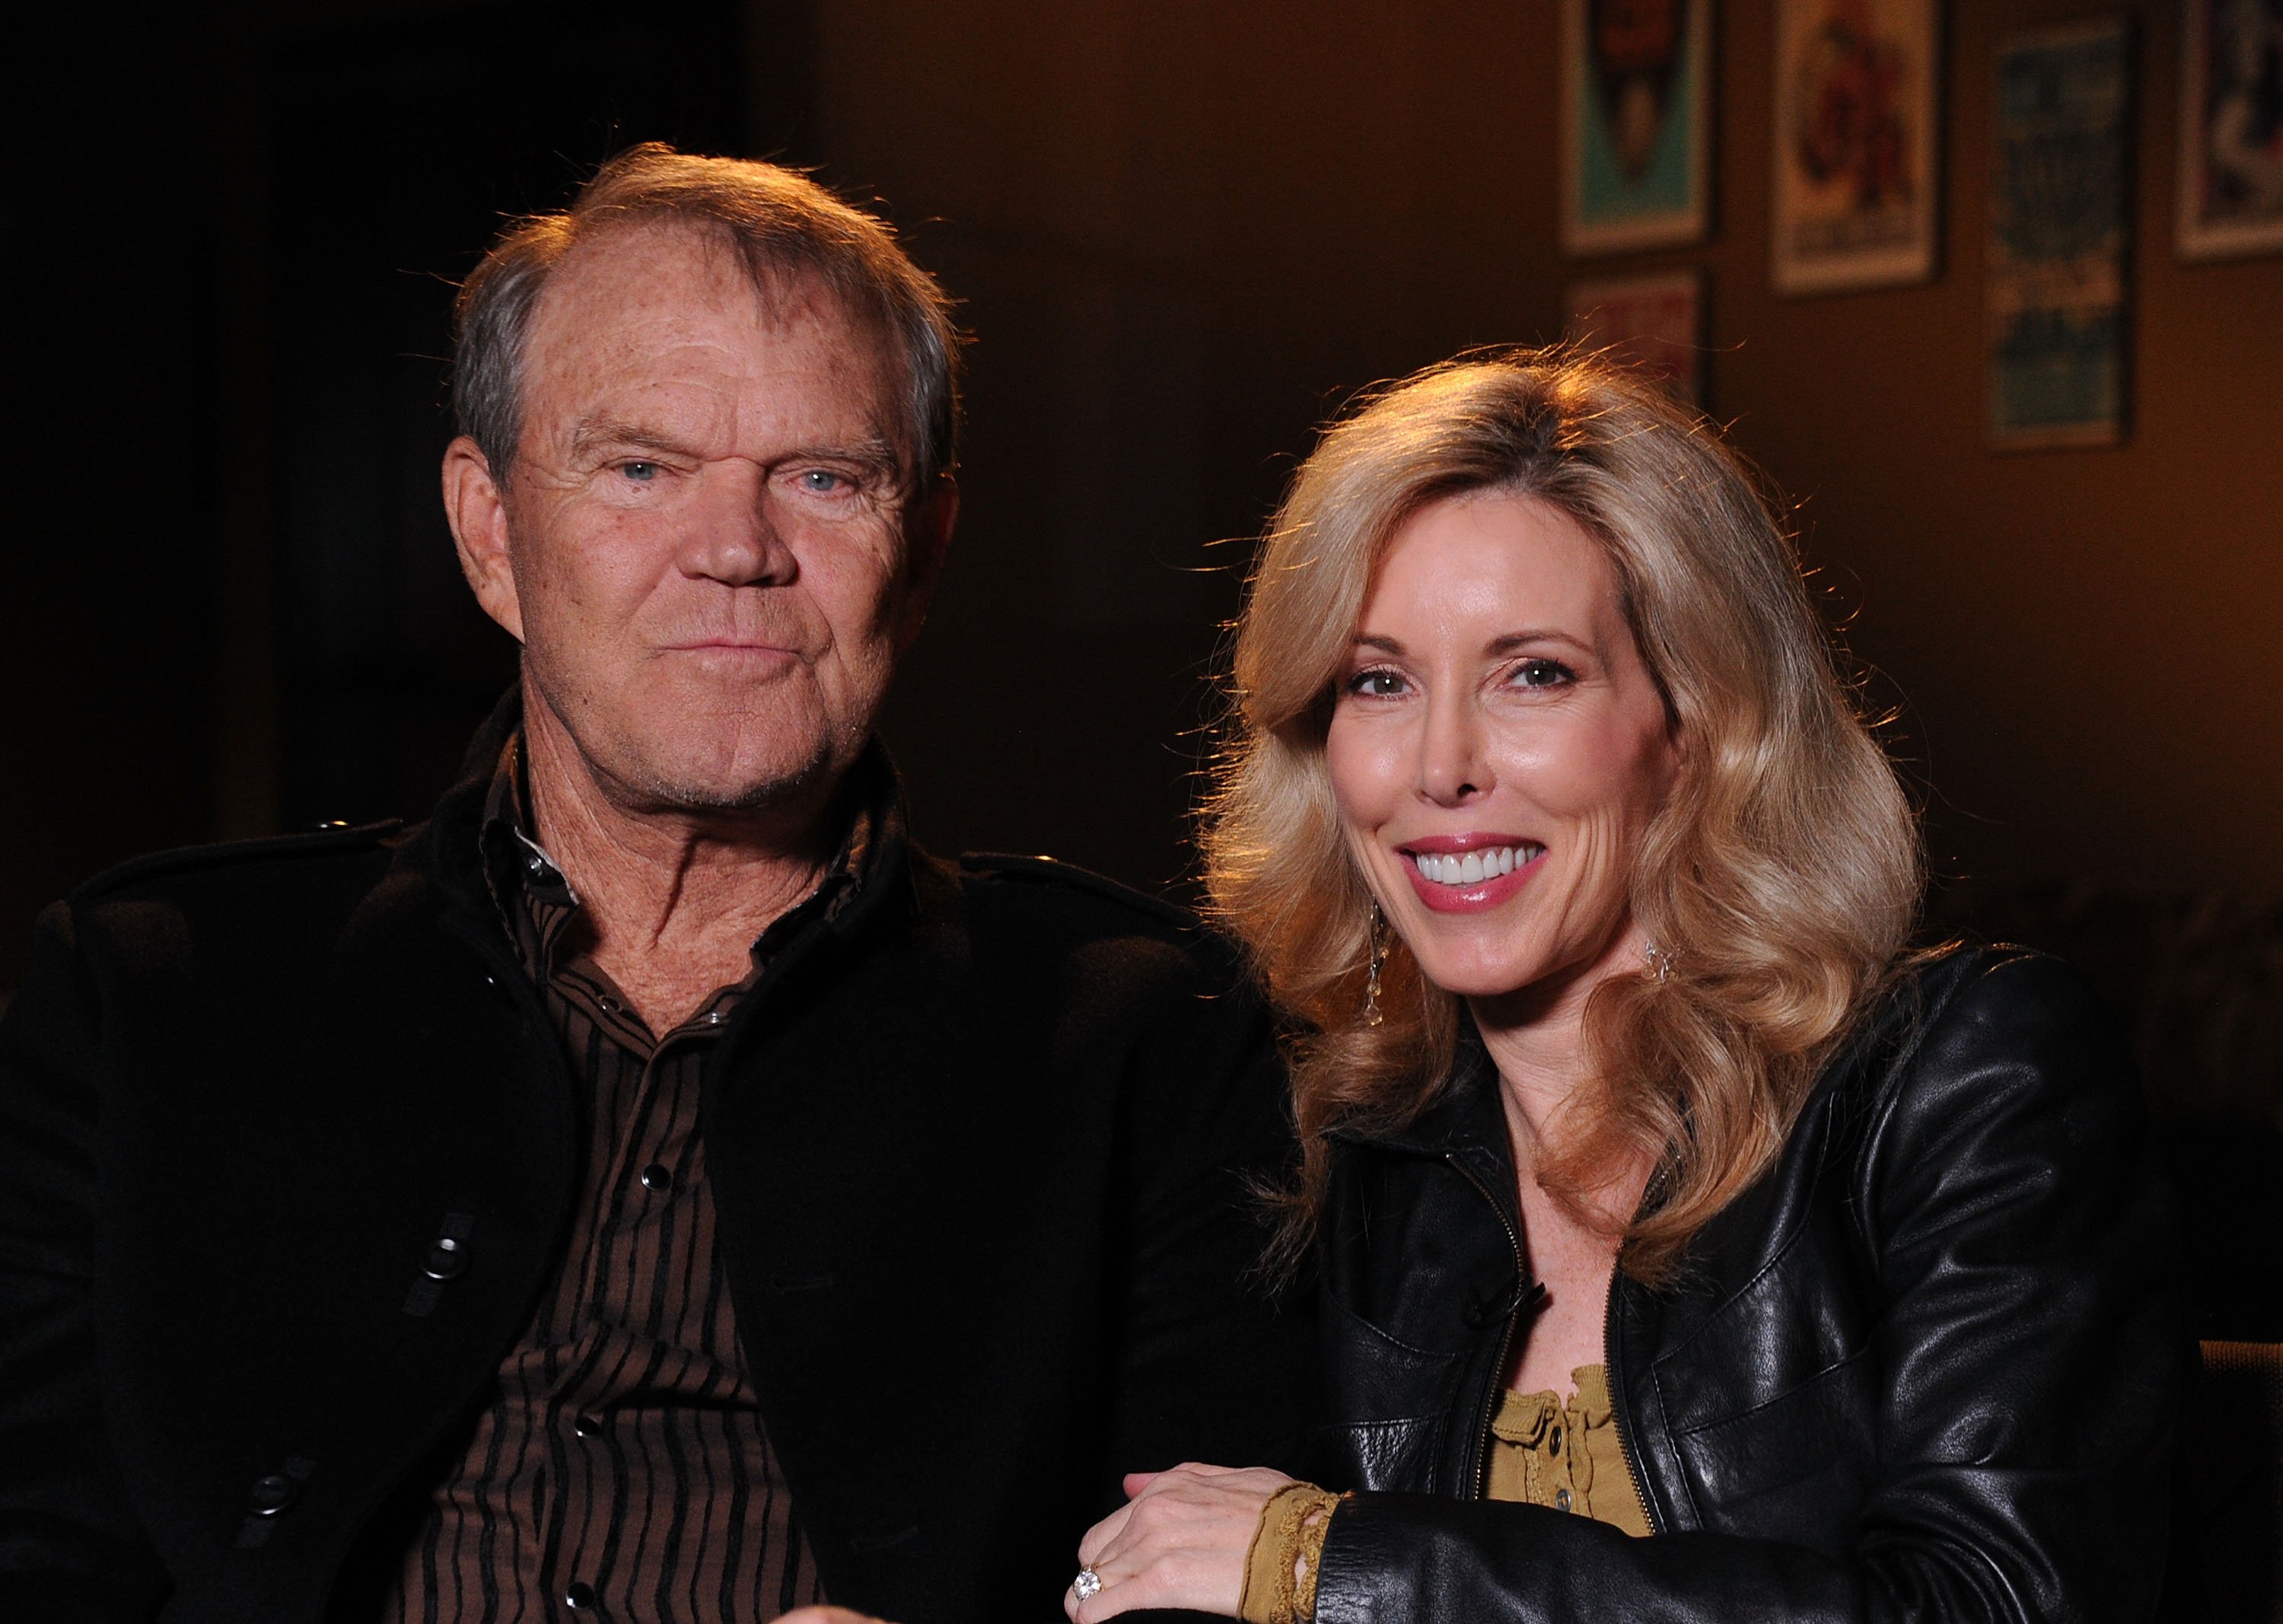 Glen Campbell & Kim at the Bridgestone Arena on Sep. 19, 2011 in Nashville, Tennessee. |Photo: Getty Images